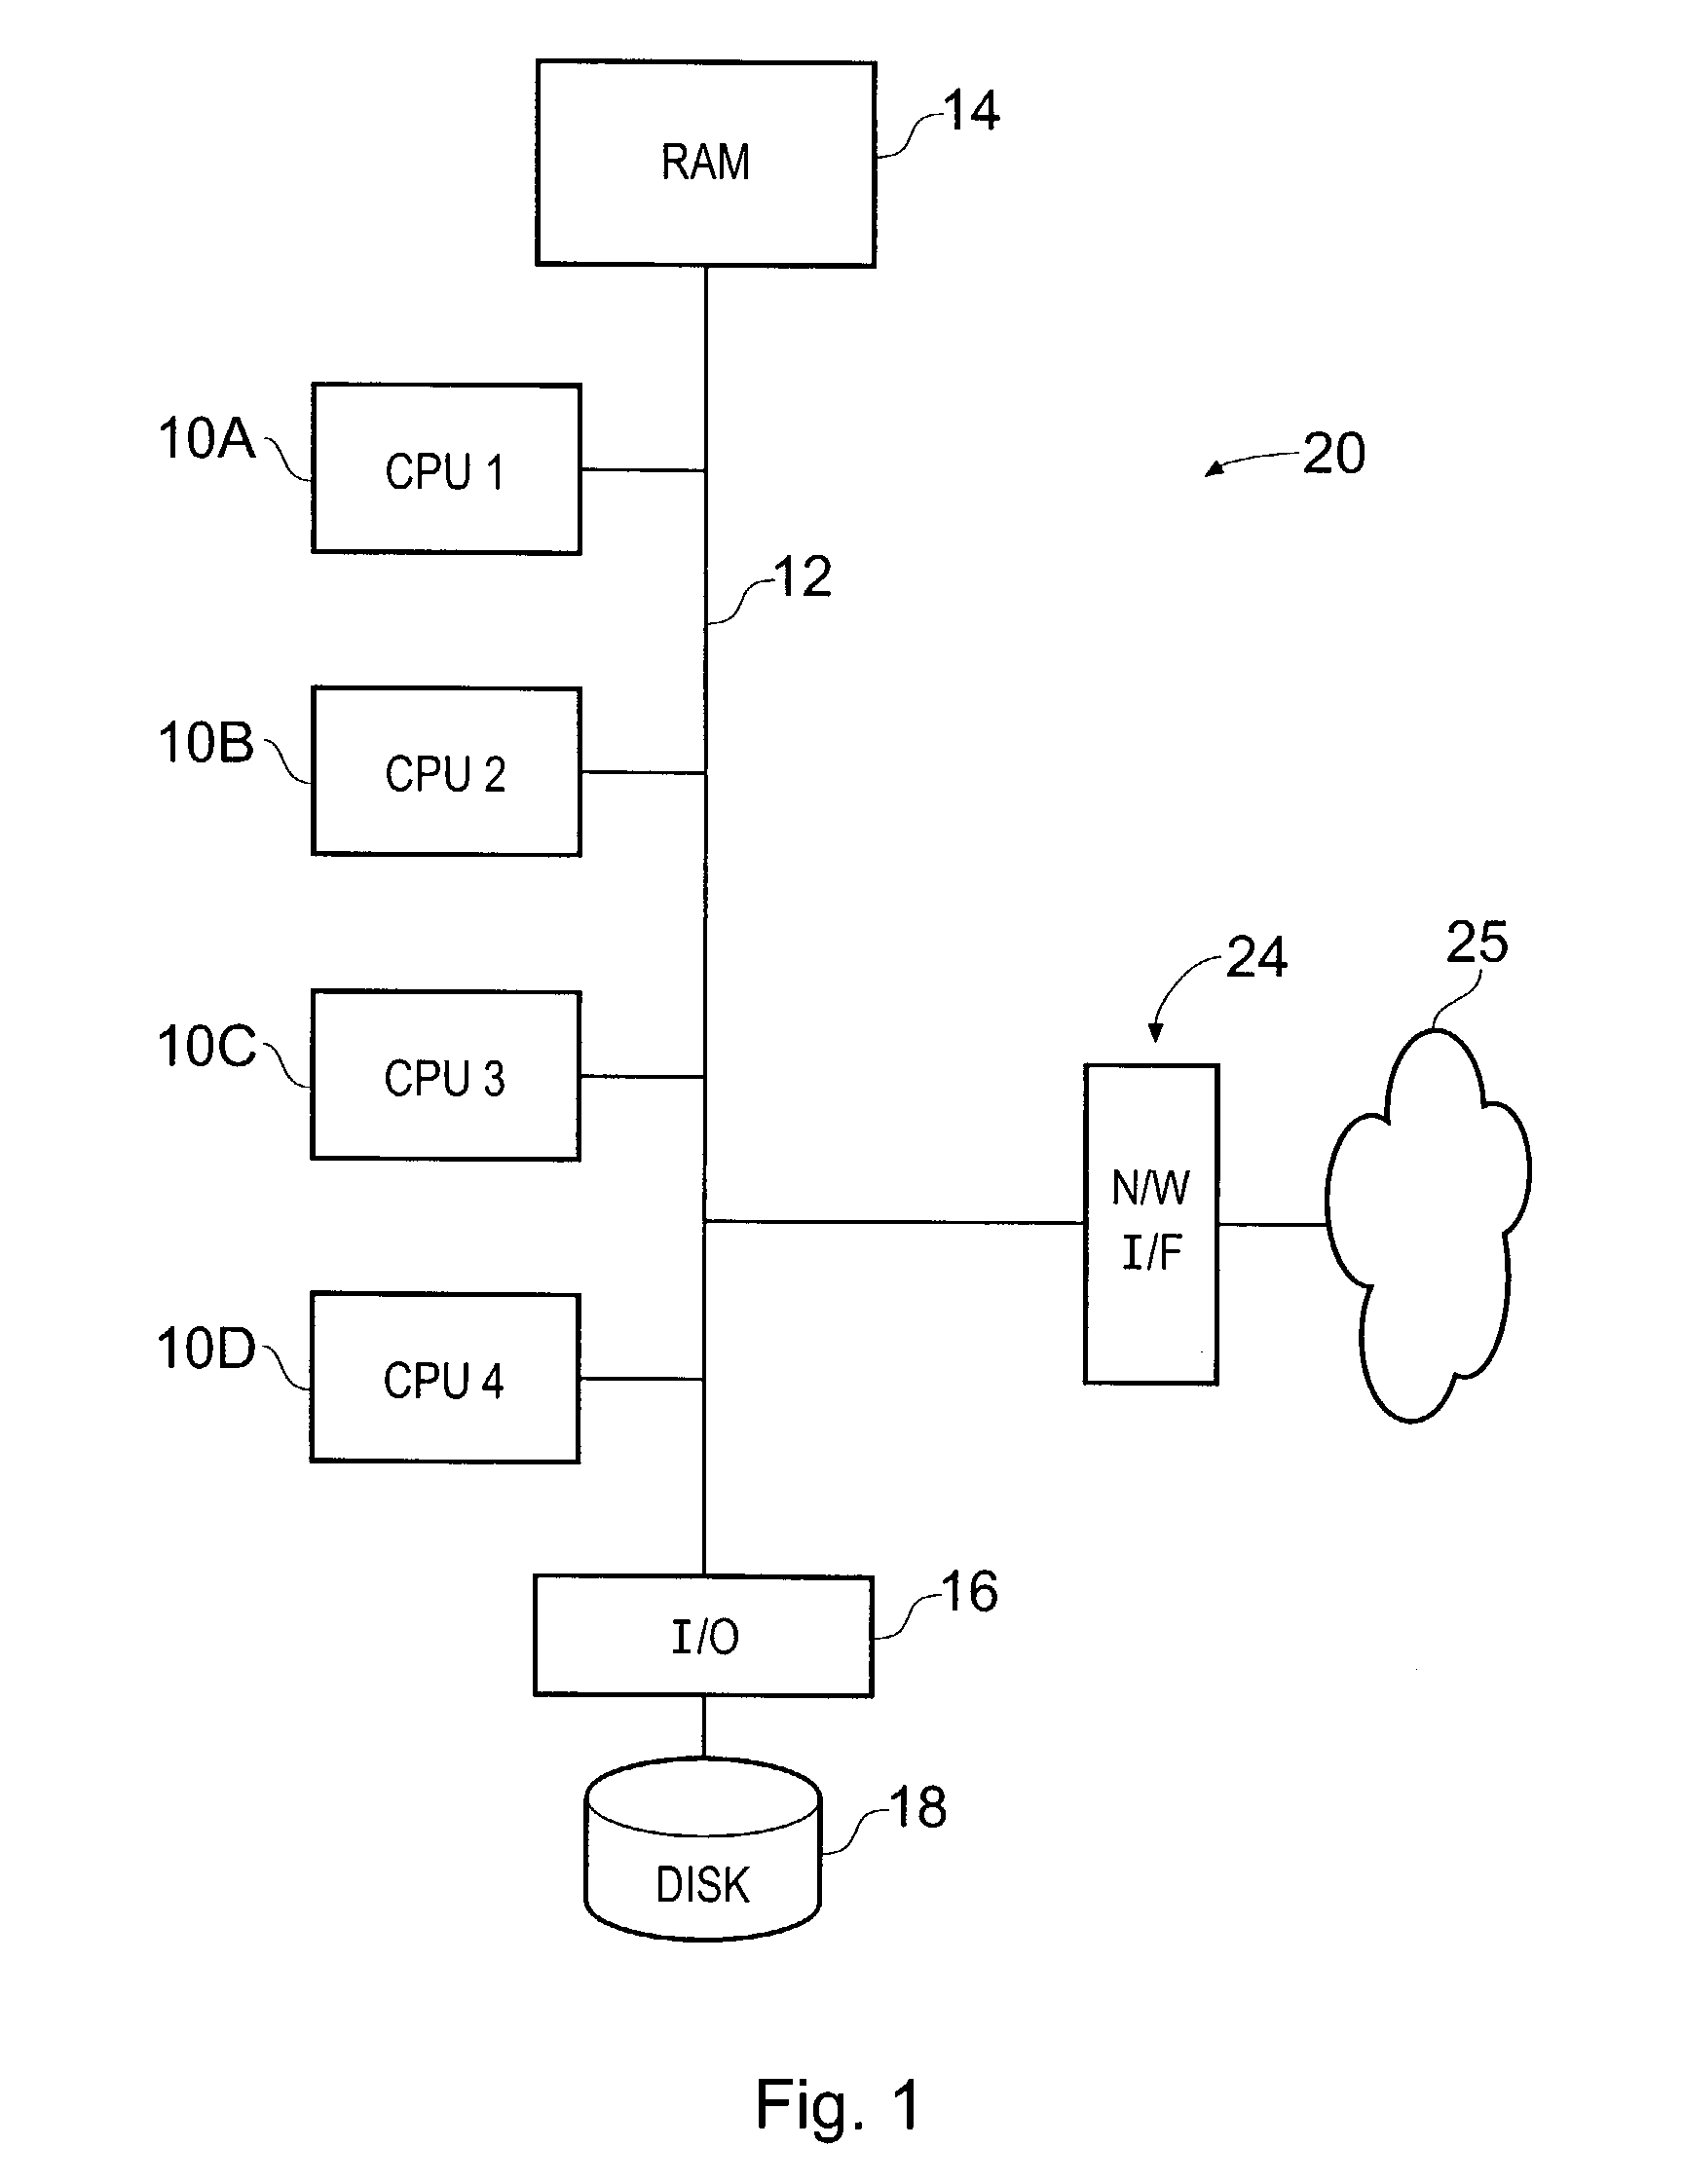 Computer system, method, and program product for performing a data access from low-level code